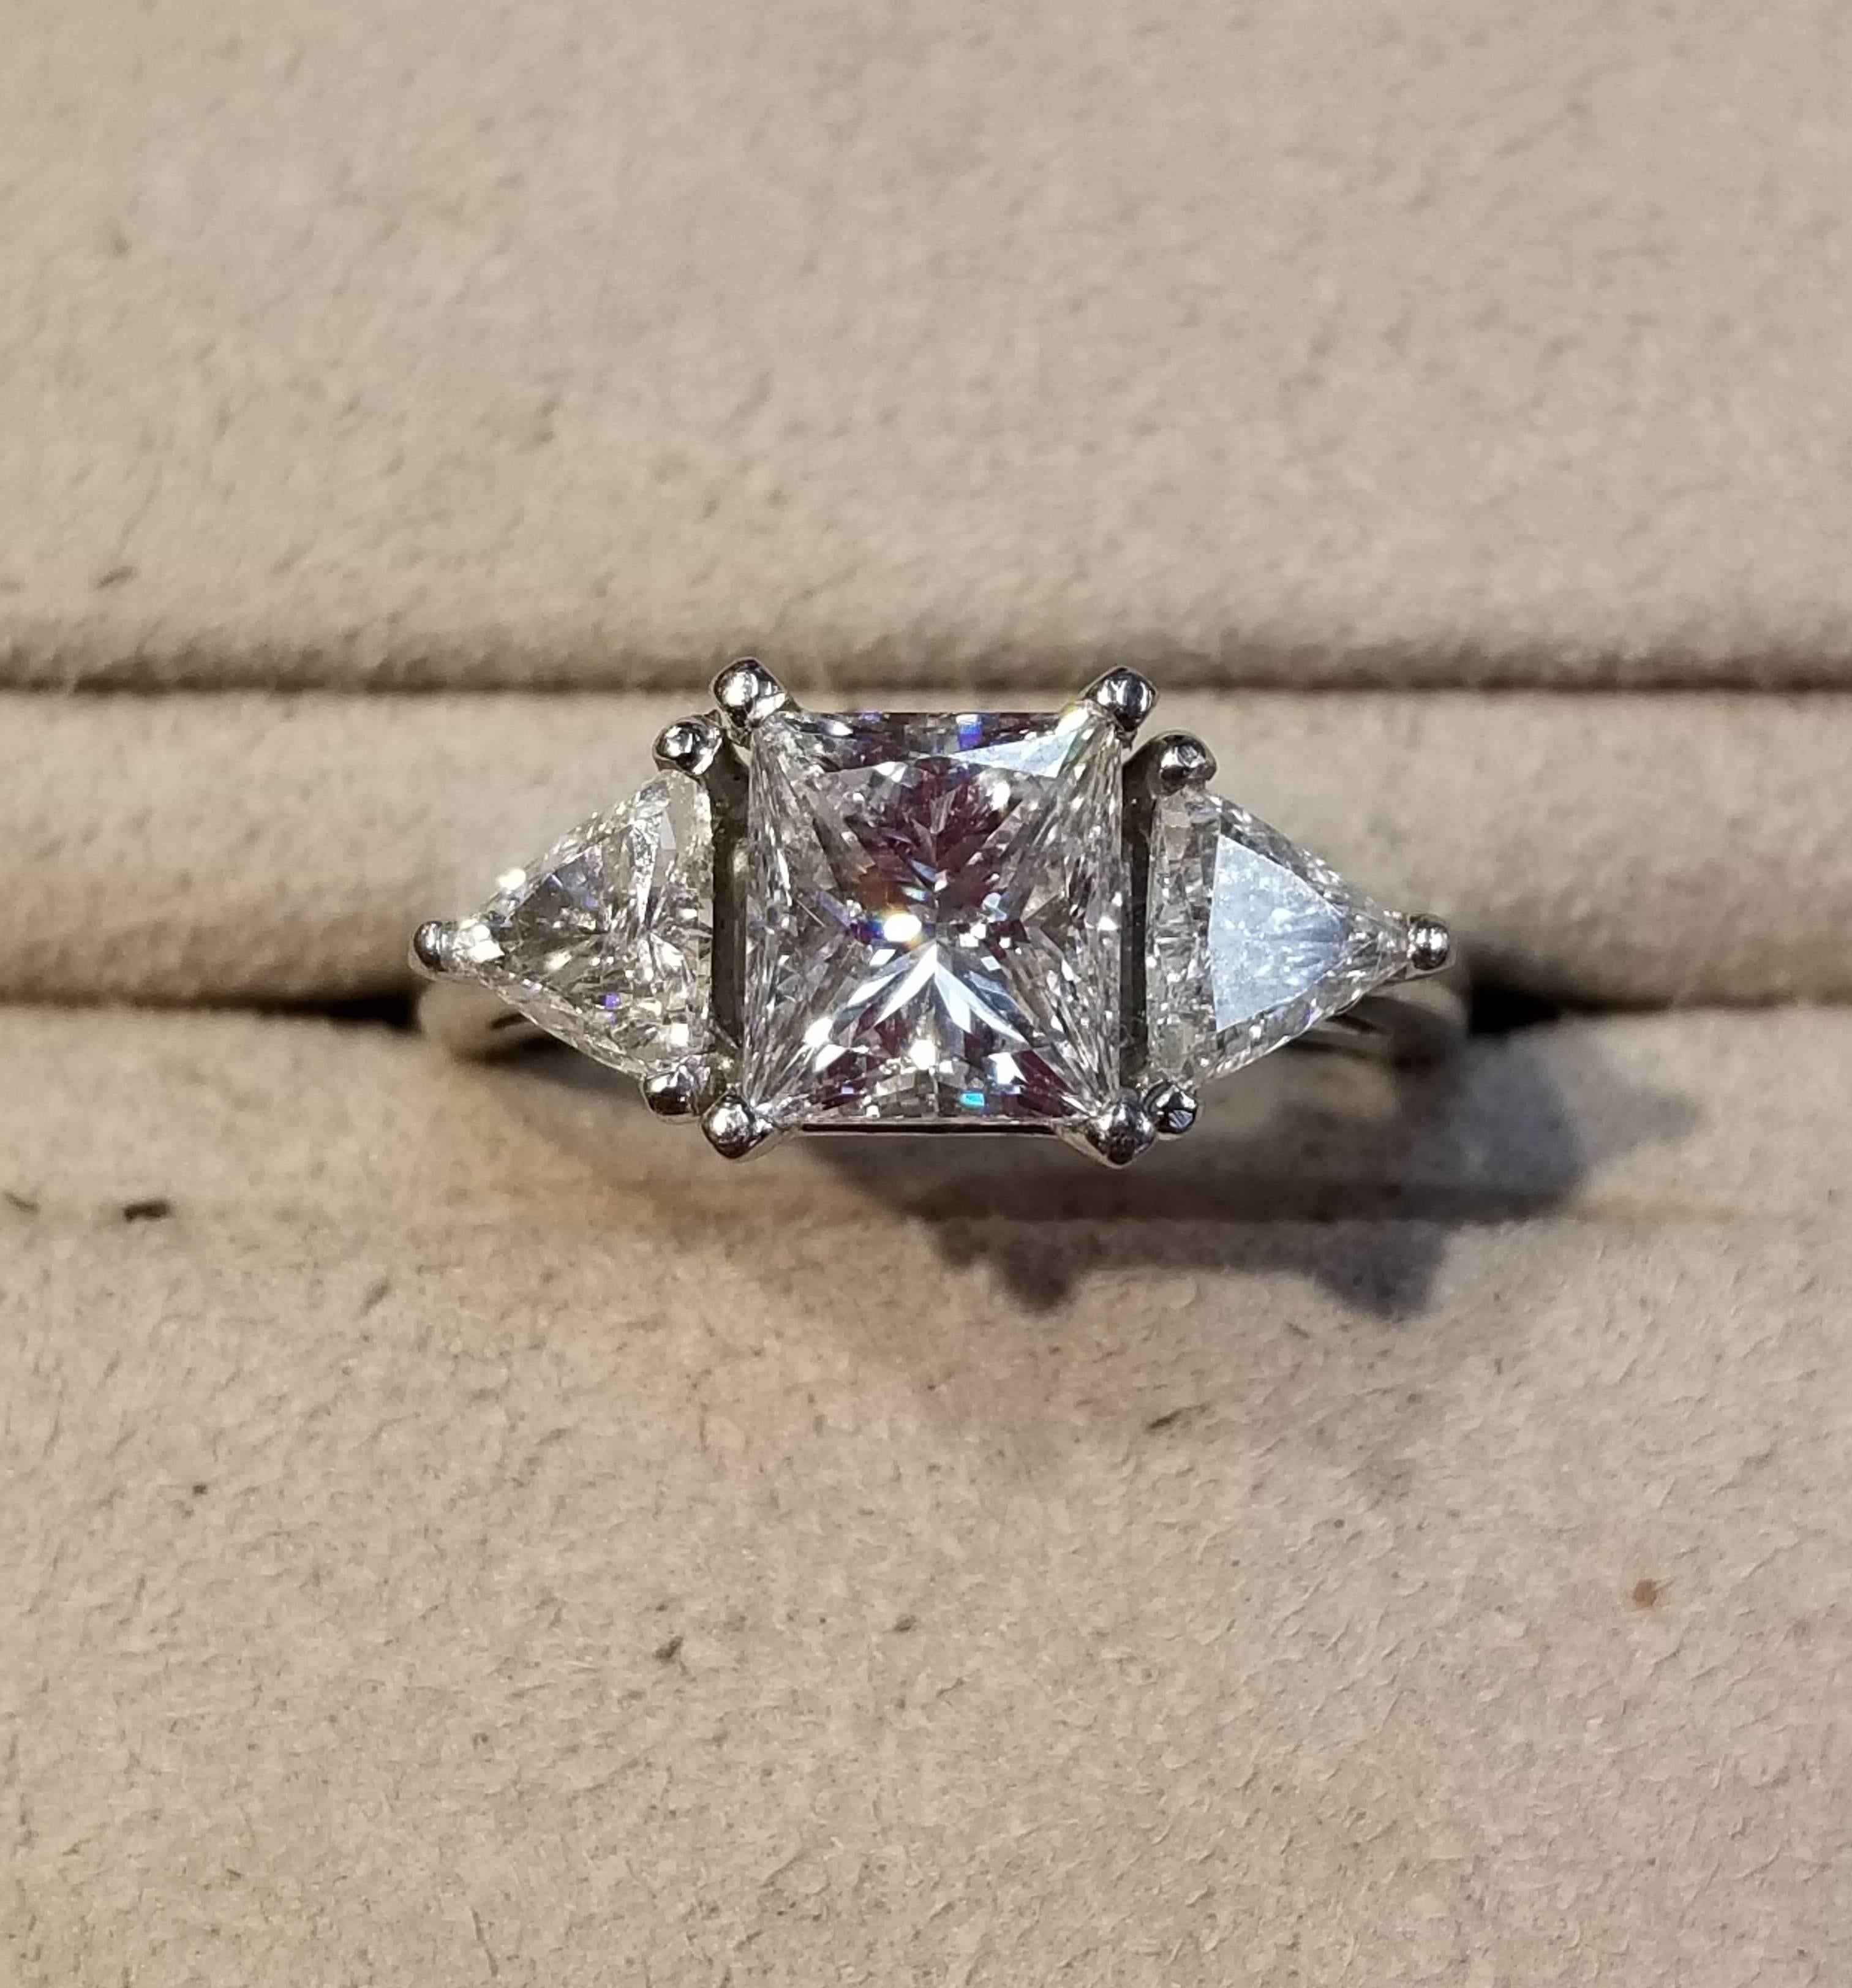 Platinum ring, size 5, with rectangular modern brilliant center stone and two bordering trilliants. The center stone is 1.51 carats, is G color and VVS2 clarity. The trilliants have a combined weight of 0.58 carats are G color.